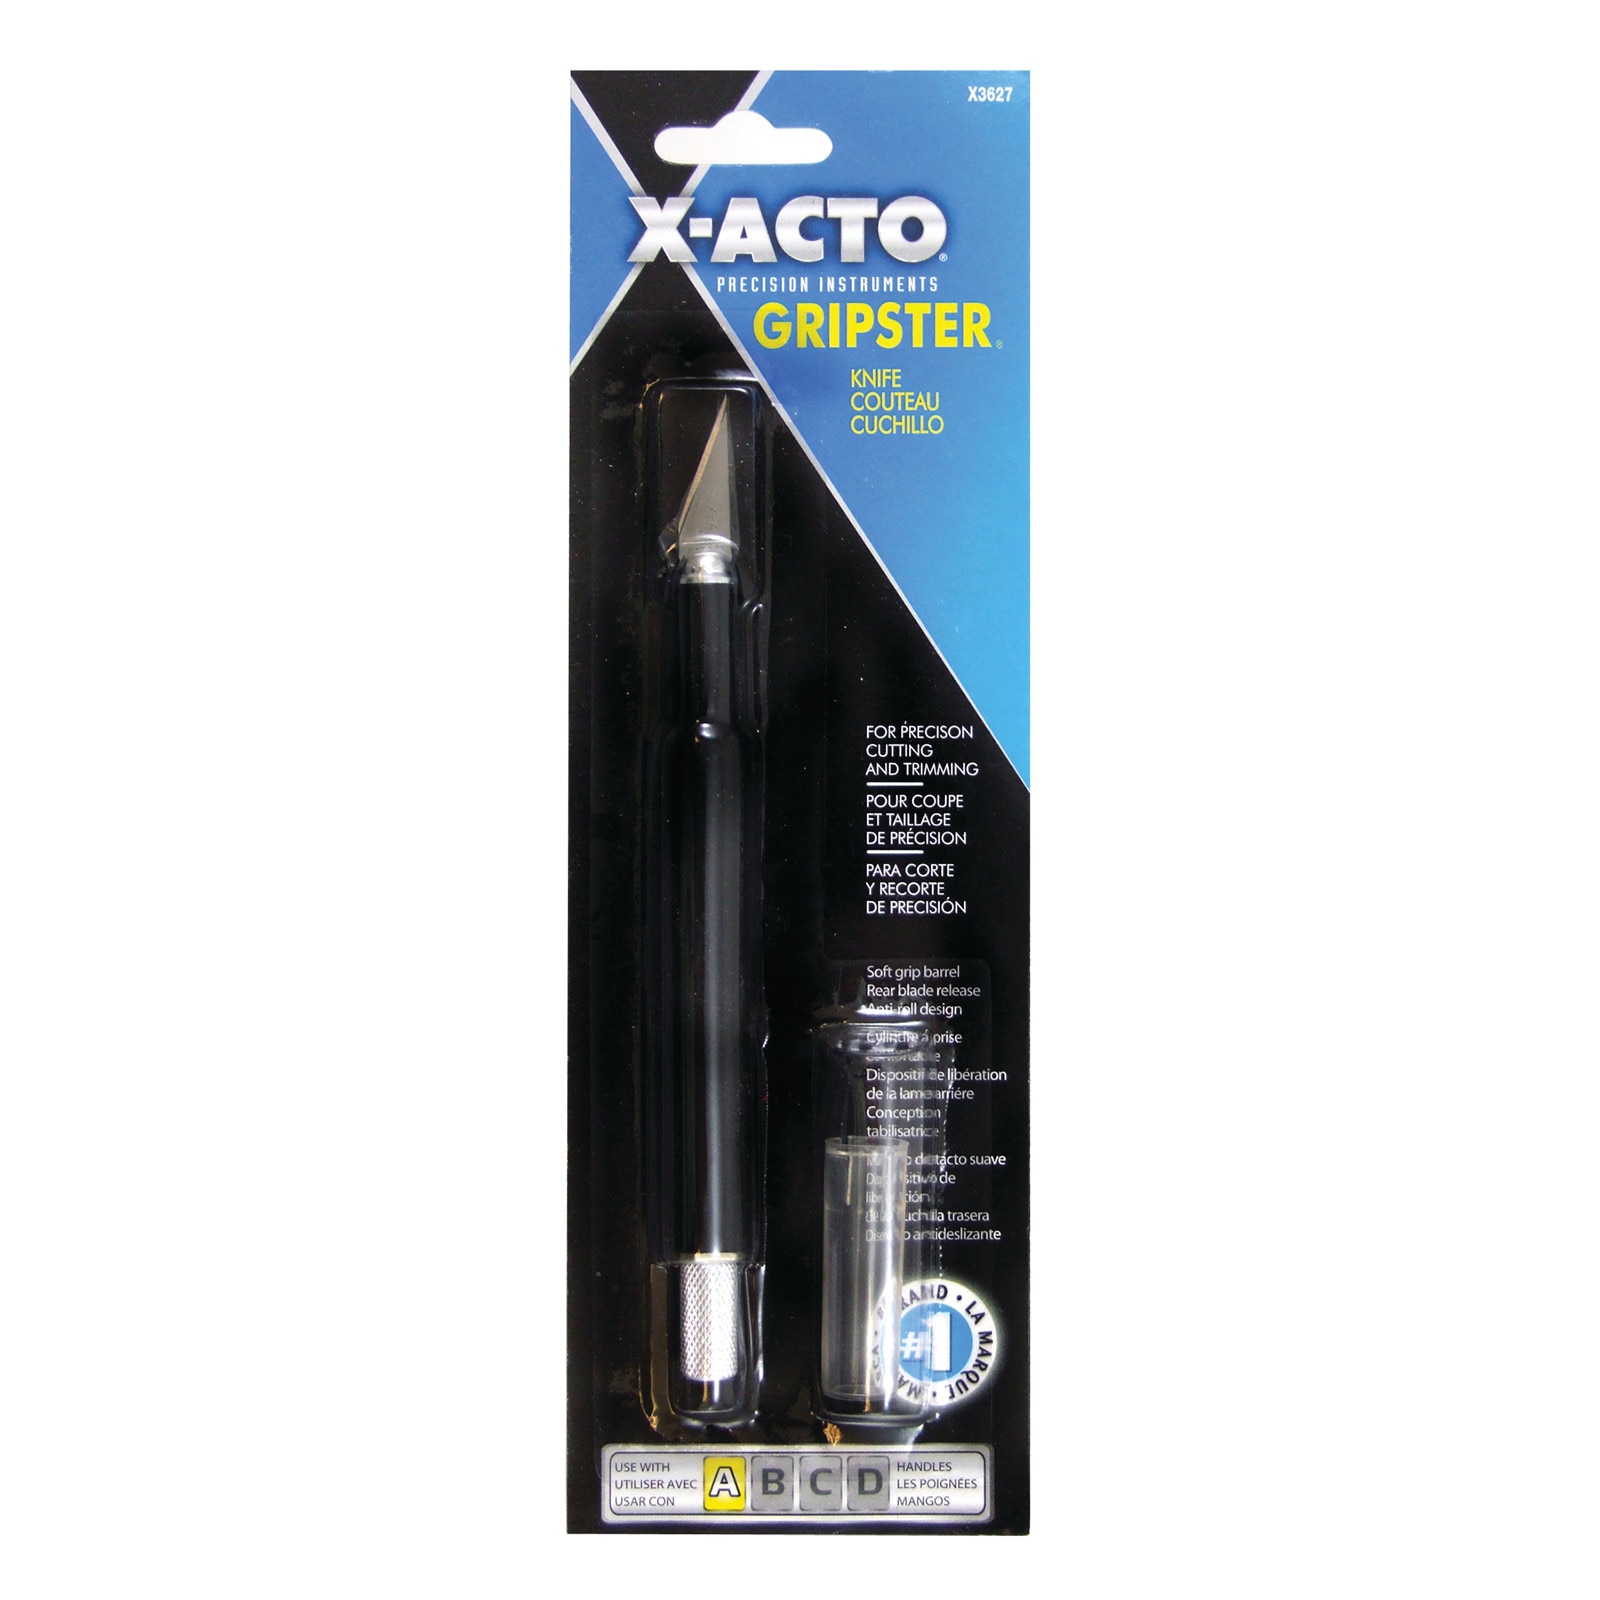 X-Acto Gripster Knife, Black